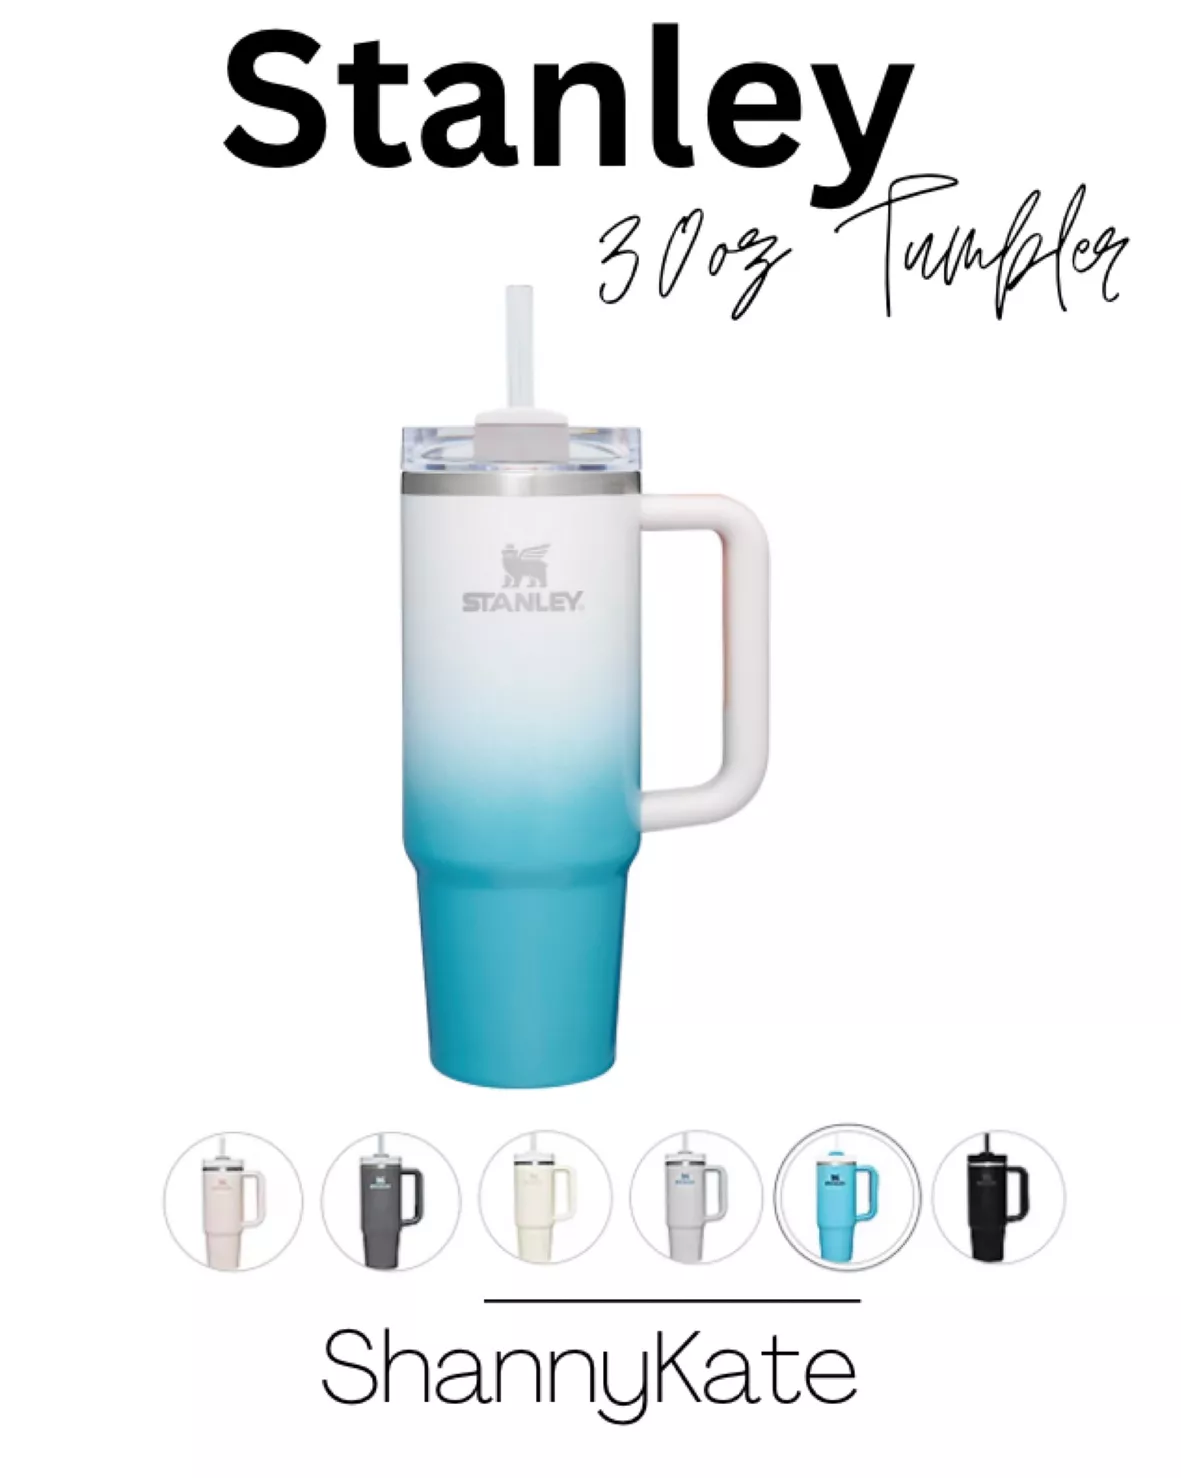 Stanley 30 oz. Quencher H2.0 FlowState Tumbler, Pool Ombre